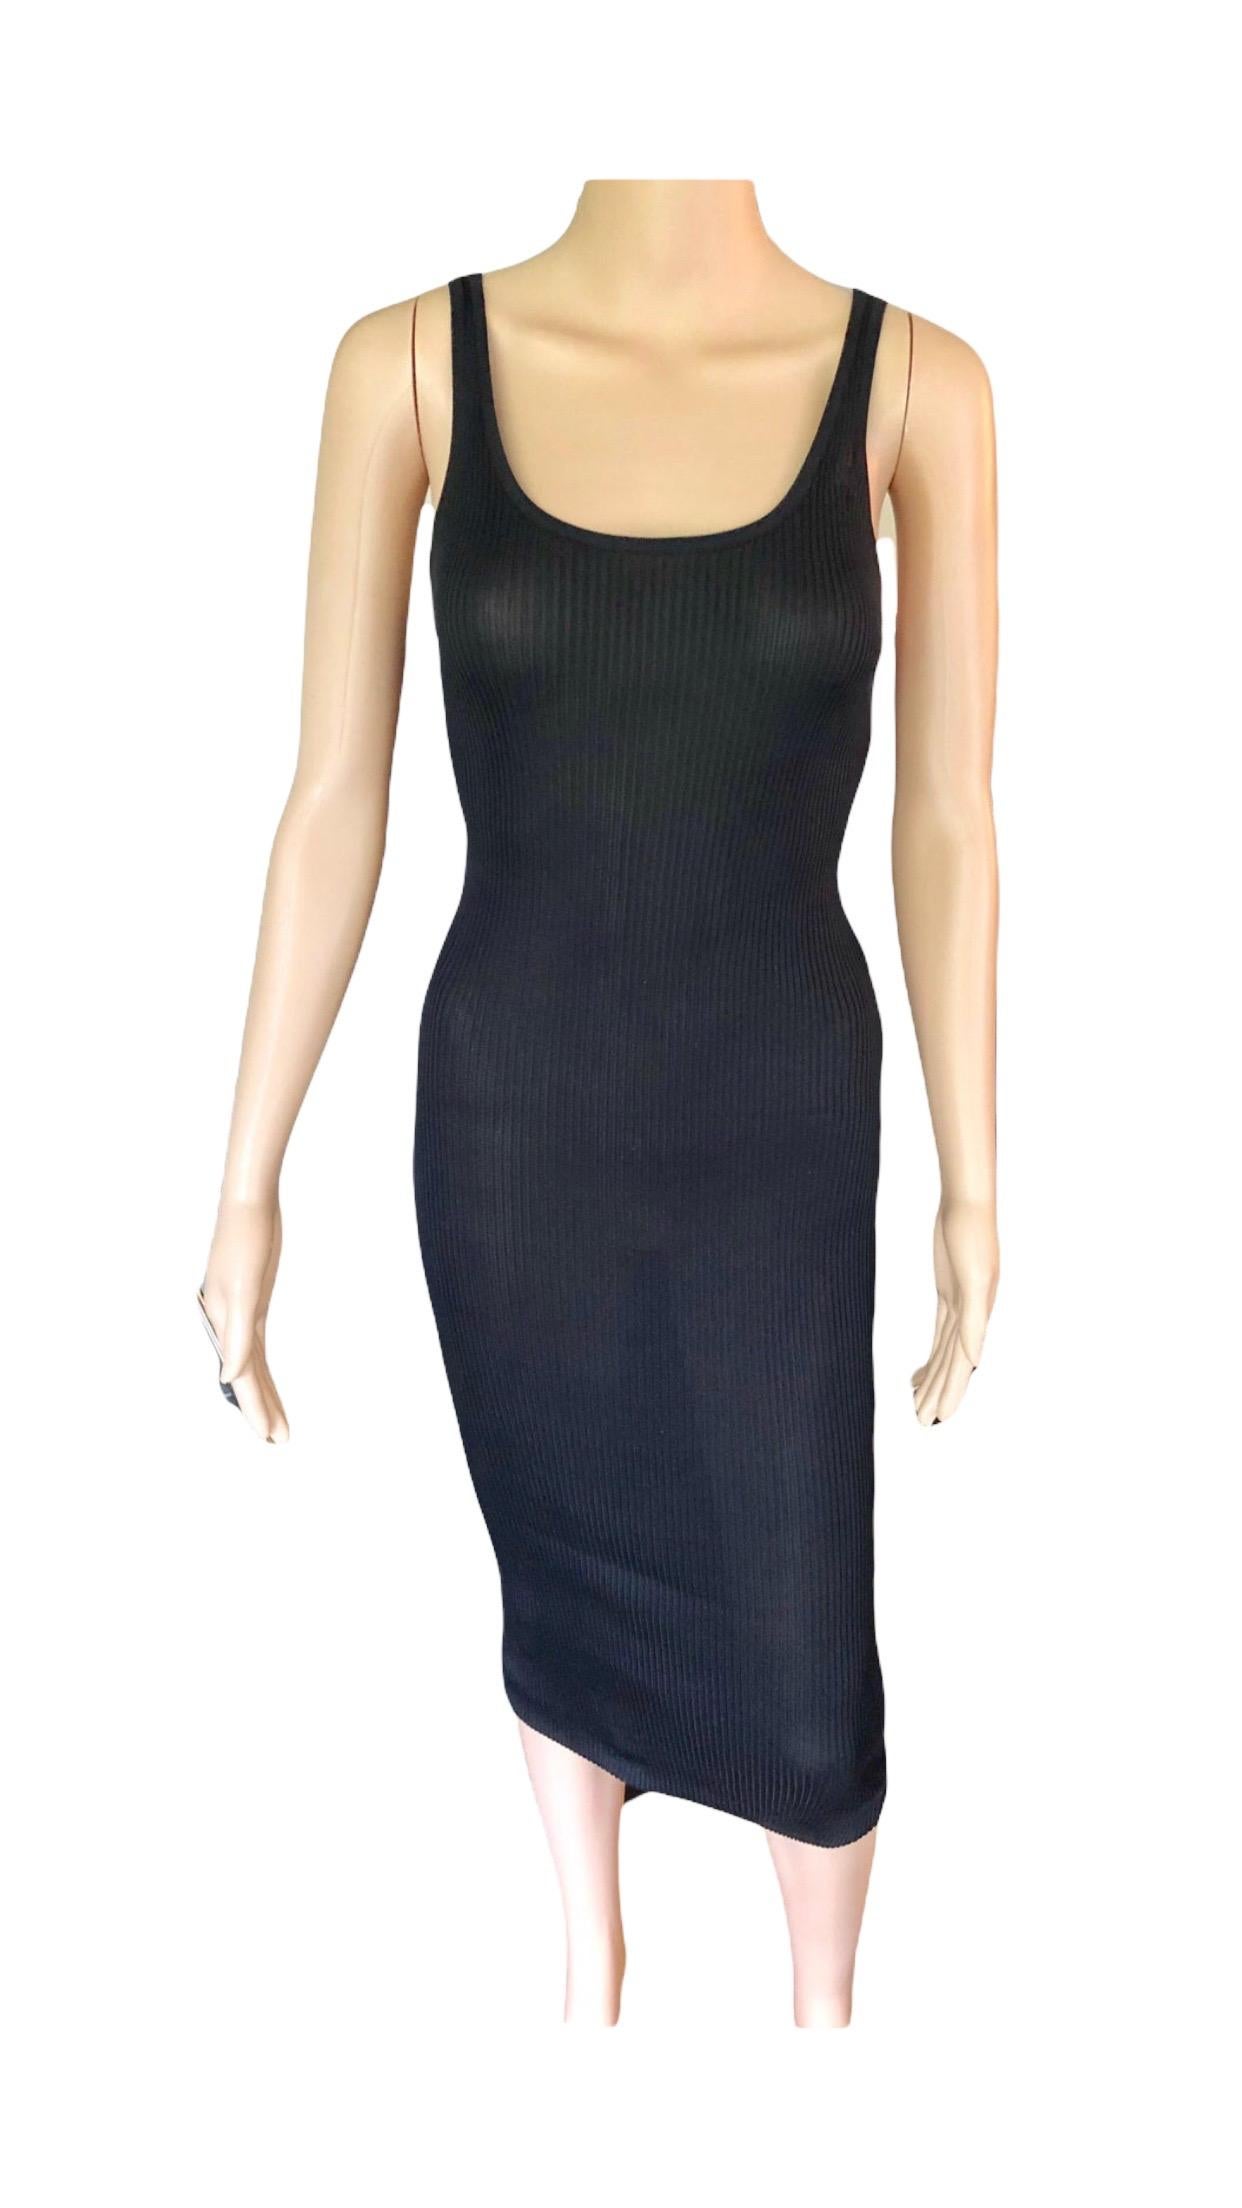 Chanel Vintage Sheer Silk Knitted Bodycon Black Dress 3